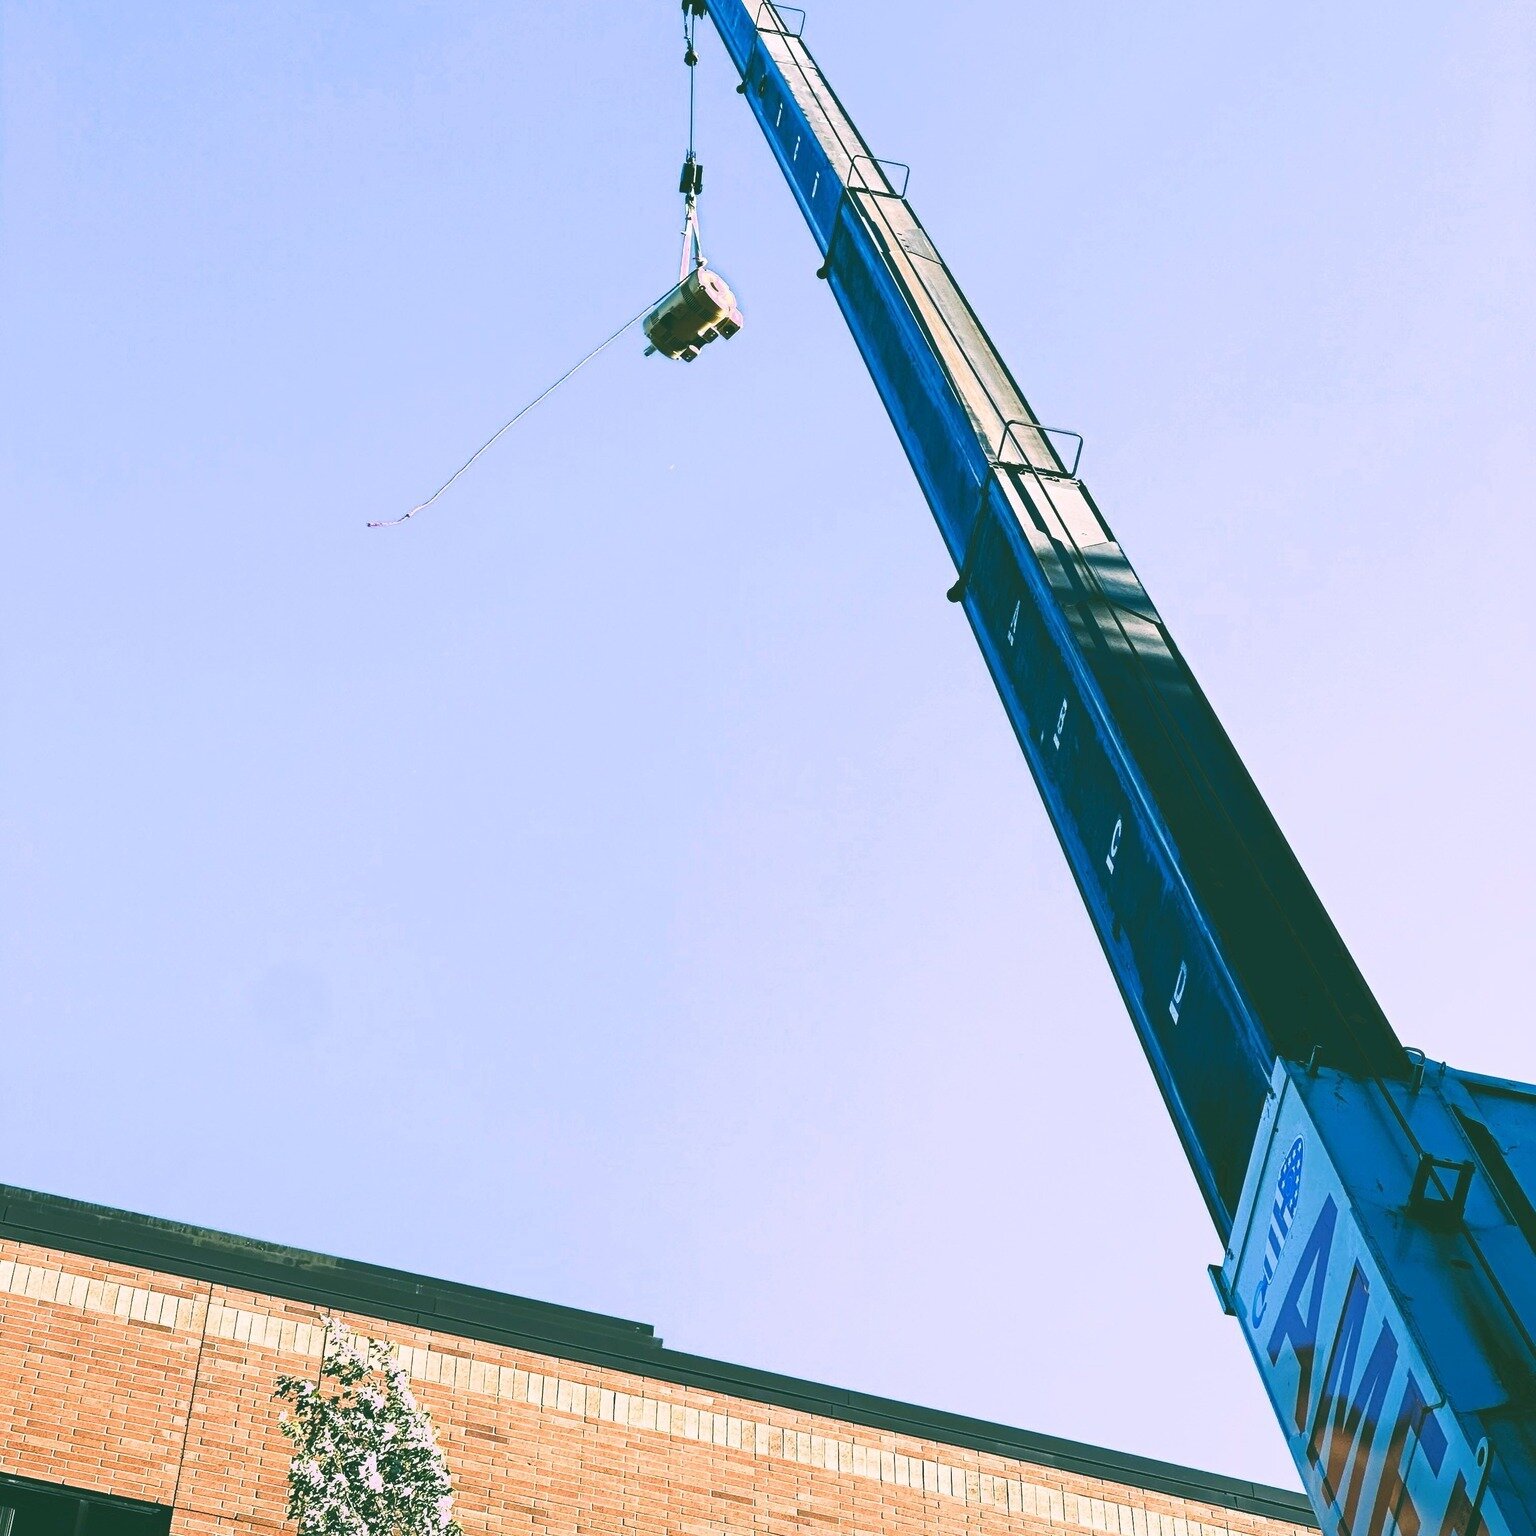 We love Crane Day! Another successful job completed!

#cranes #hvaclife #lovewhatwedo